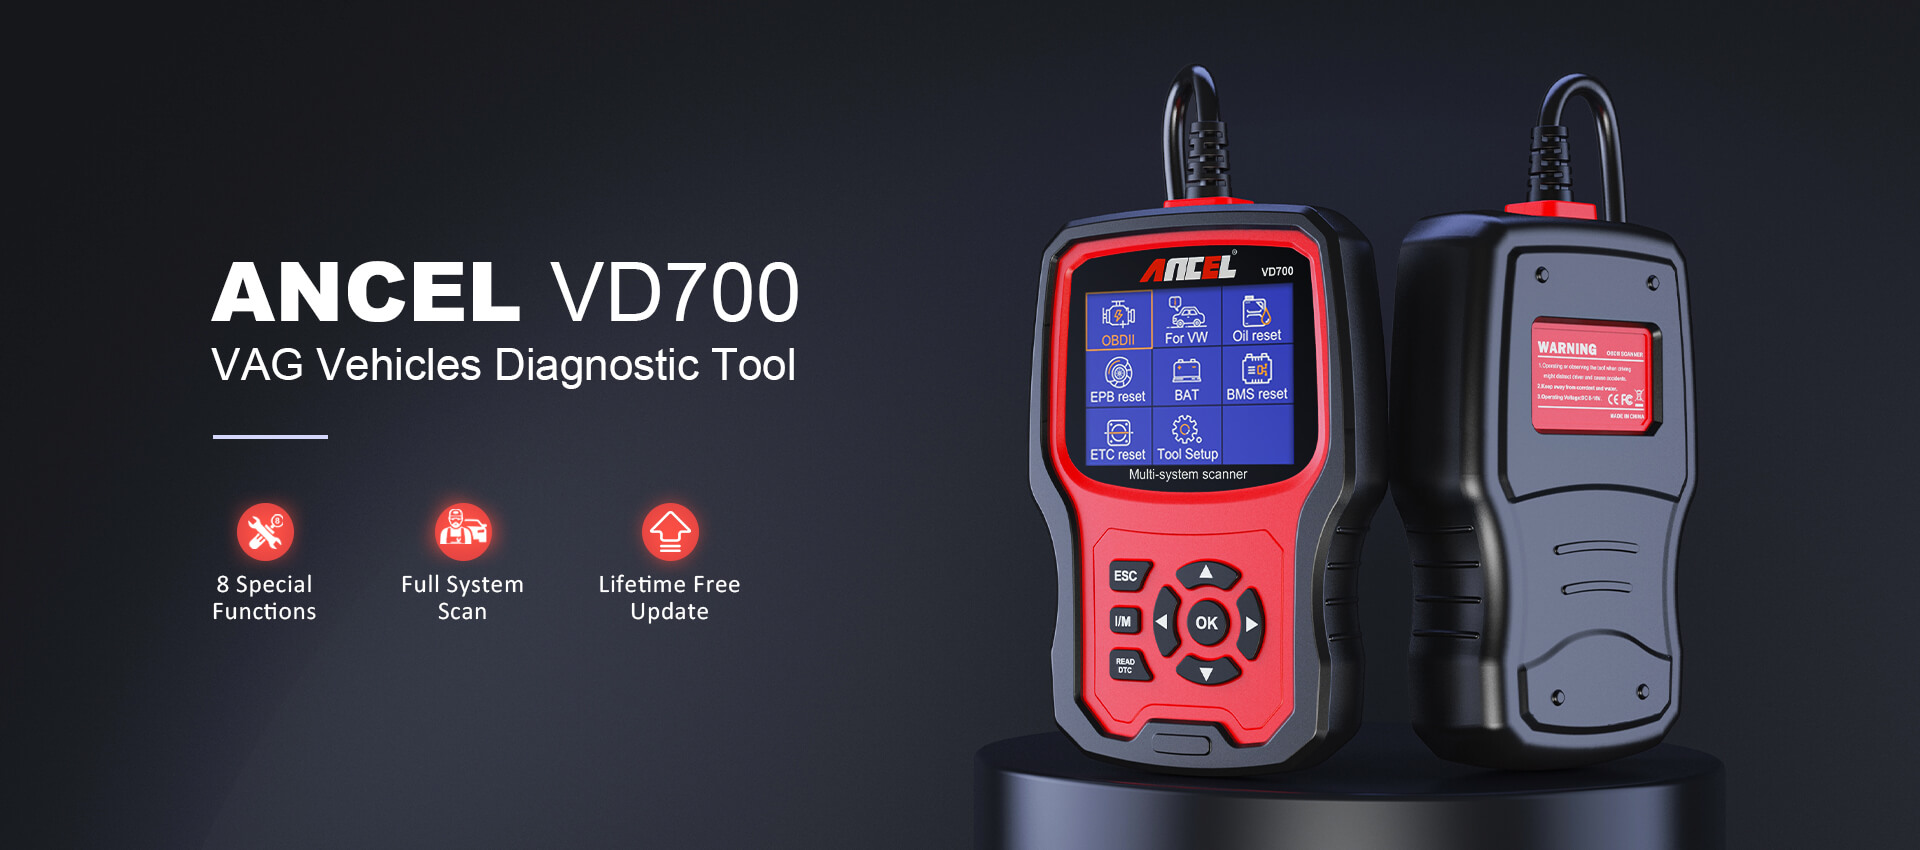 ANCEL VD700 Full Systems Diagnostic Tool Fit for Volkswagen VW Audi Skoda  Seat, All Functions OBD2 Scanner Car Code Reader for VAG Vehicles with